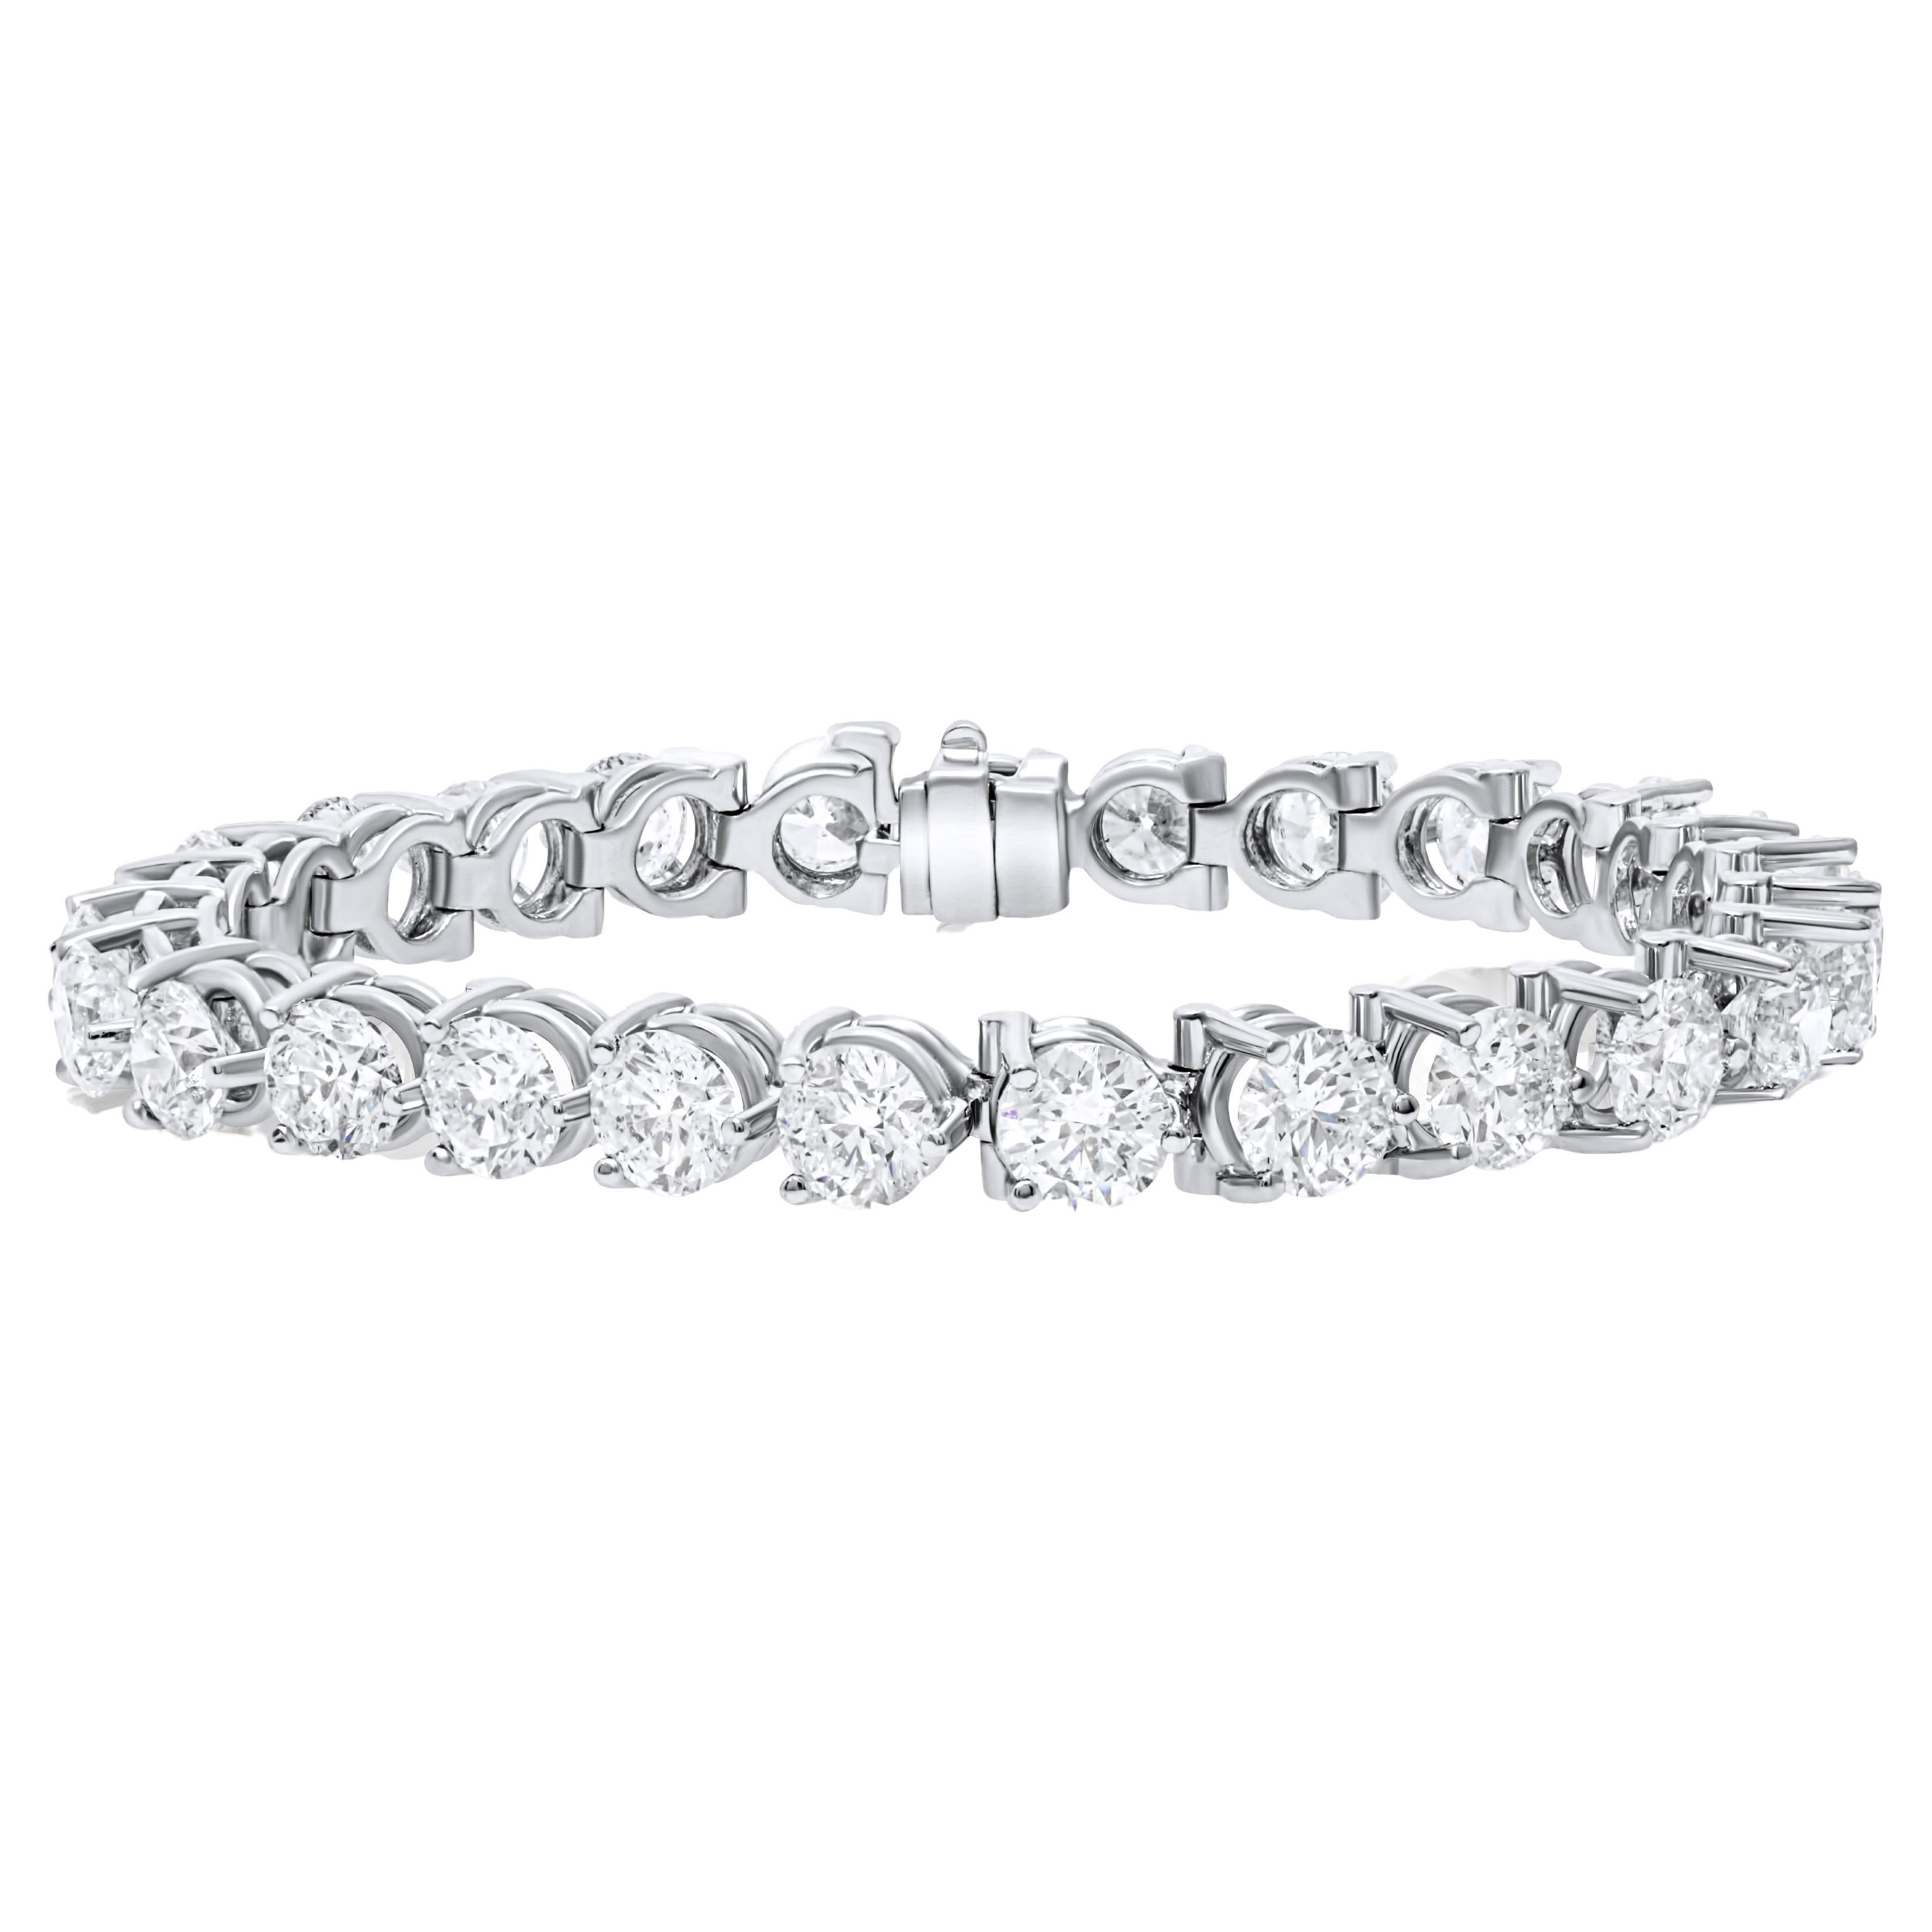 Diana M. 18 kt white gold 3 prong diamond tennis bracelet adorned with 13.00 cts For Sale